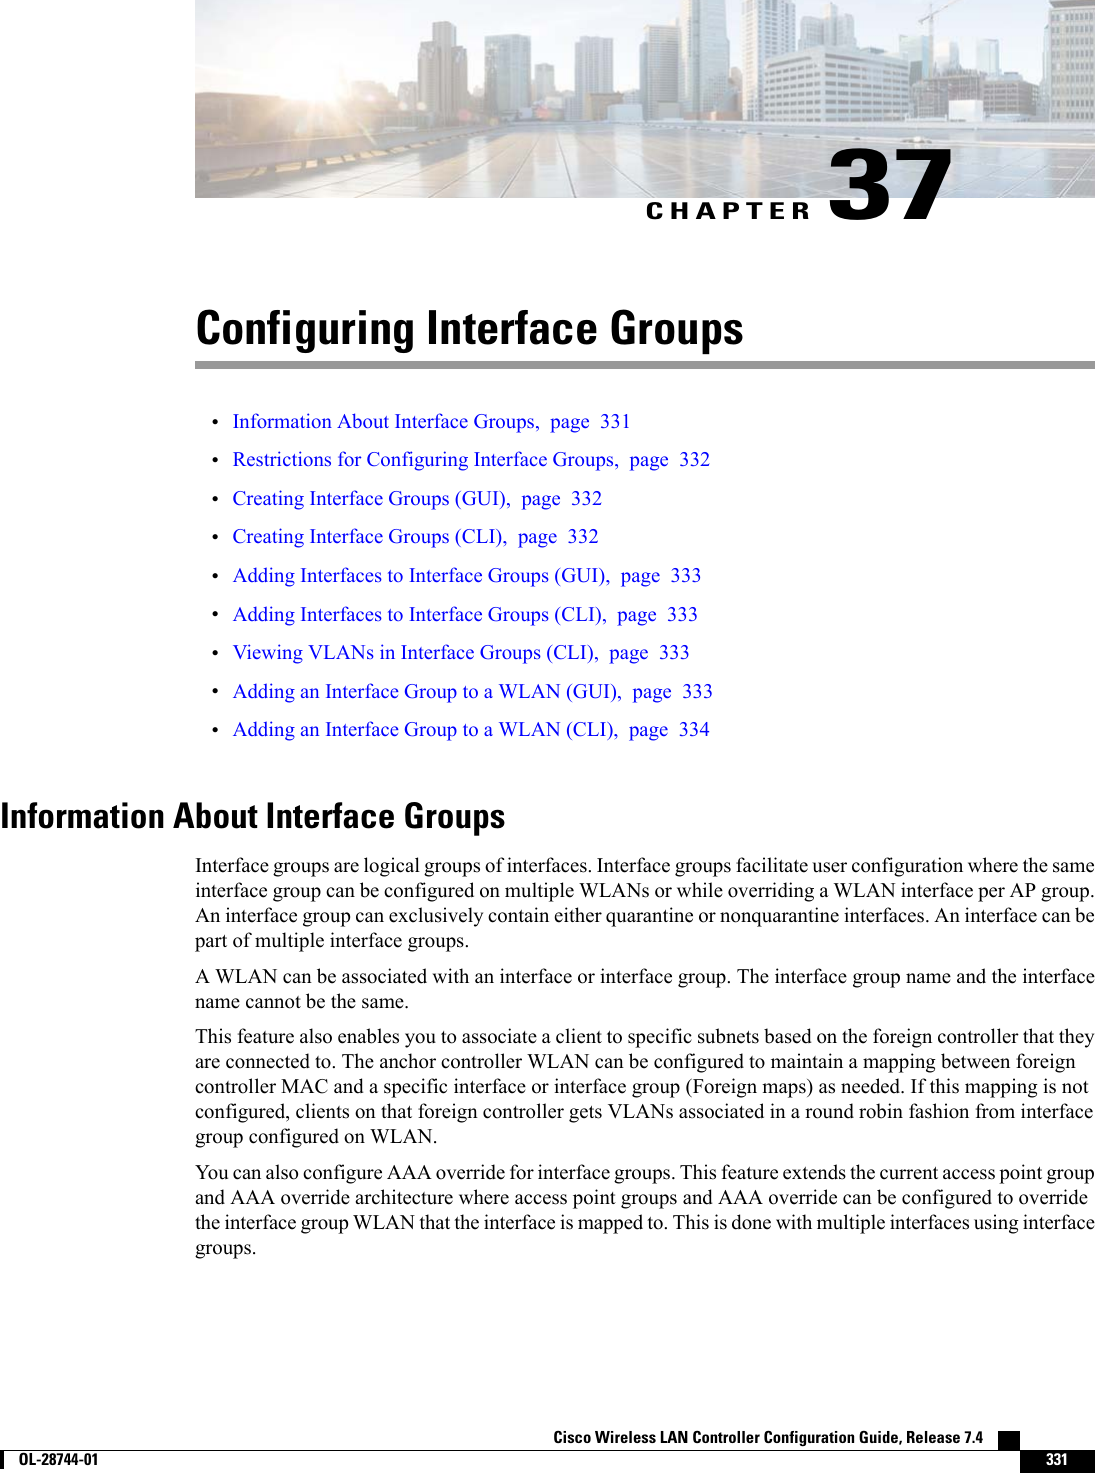 CHAPTER 37Configuring Interface Groups•Information About Interface Groups, page 331•Restrictions for Configuring Interface Groups, page 332•Creating Interface Groups (GUI), page 332•Creating Interface Groups (CLI), page 332•Adding Interfaces to Interface Groups (GUI), page 333•Adding Interfaces to Interface Groups (CLI), page 333•Viewing VLANs in Interface Groups (CLI), page 333•Adding an Interface Group to a WLAN (GUI), page 333•Adding an Interface Group to a WLAN (CLI), page 334Information About Interface GroupsInterface groups are logical groups of interfaces. Interface groups facilitate user configuration where the sameinterface group can be configured on multiple WLANs or while overriding a WLAN interface per AP group.An interface group can exclusively contain either quarantine or nonquarantine interfaces. An interface can bepart of multiple interface groups.A WLAN can be associated with an interface or interface group. The interface group name and the interfacename cannot be the same.This feature also enables you to associate a client to specific subnets based on the foreign controller that theyare connected to. The anchor controller WLAN can be configured to maintain a mapping between foreigncontroller MAC and a specific interface or interface group (Foreign maps) as needed. If this mapping is notconfigured, clients on that foreign controller gets VLANs associated in a round robin fashion from interfacegroup configured on WLAN.You can also configure AAA override for interface groups. This feature extends the current access point groupand AAA override architecture where access point groups and AAA override can be configured to overridethe interface group WLAN that the interface is mapped to. This is done with multiple interfaces using interfacegroups.Cisco Wireless LAN Controller Configuration Guide, Release 7.4        OL-28744-01 331